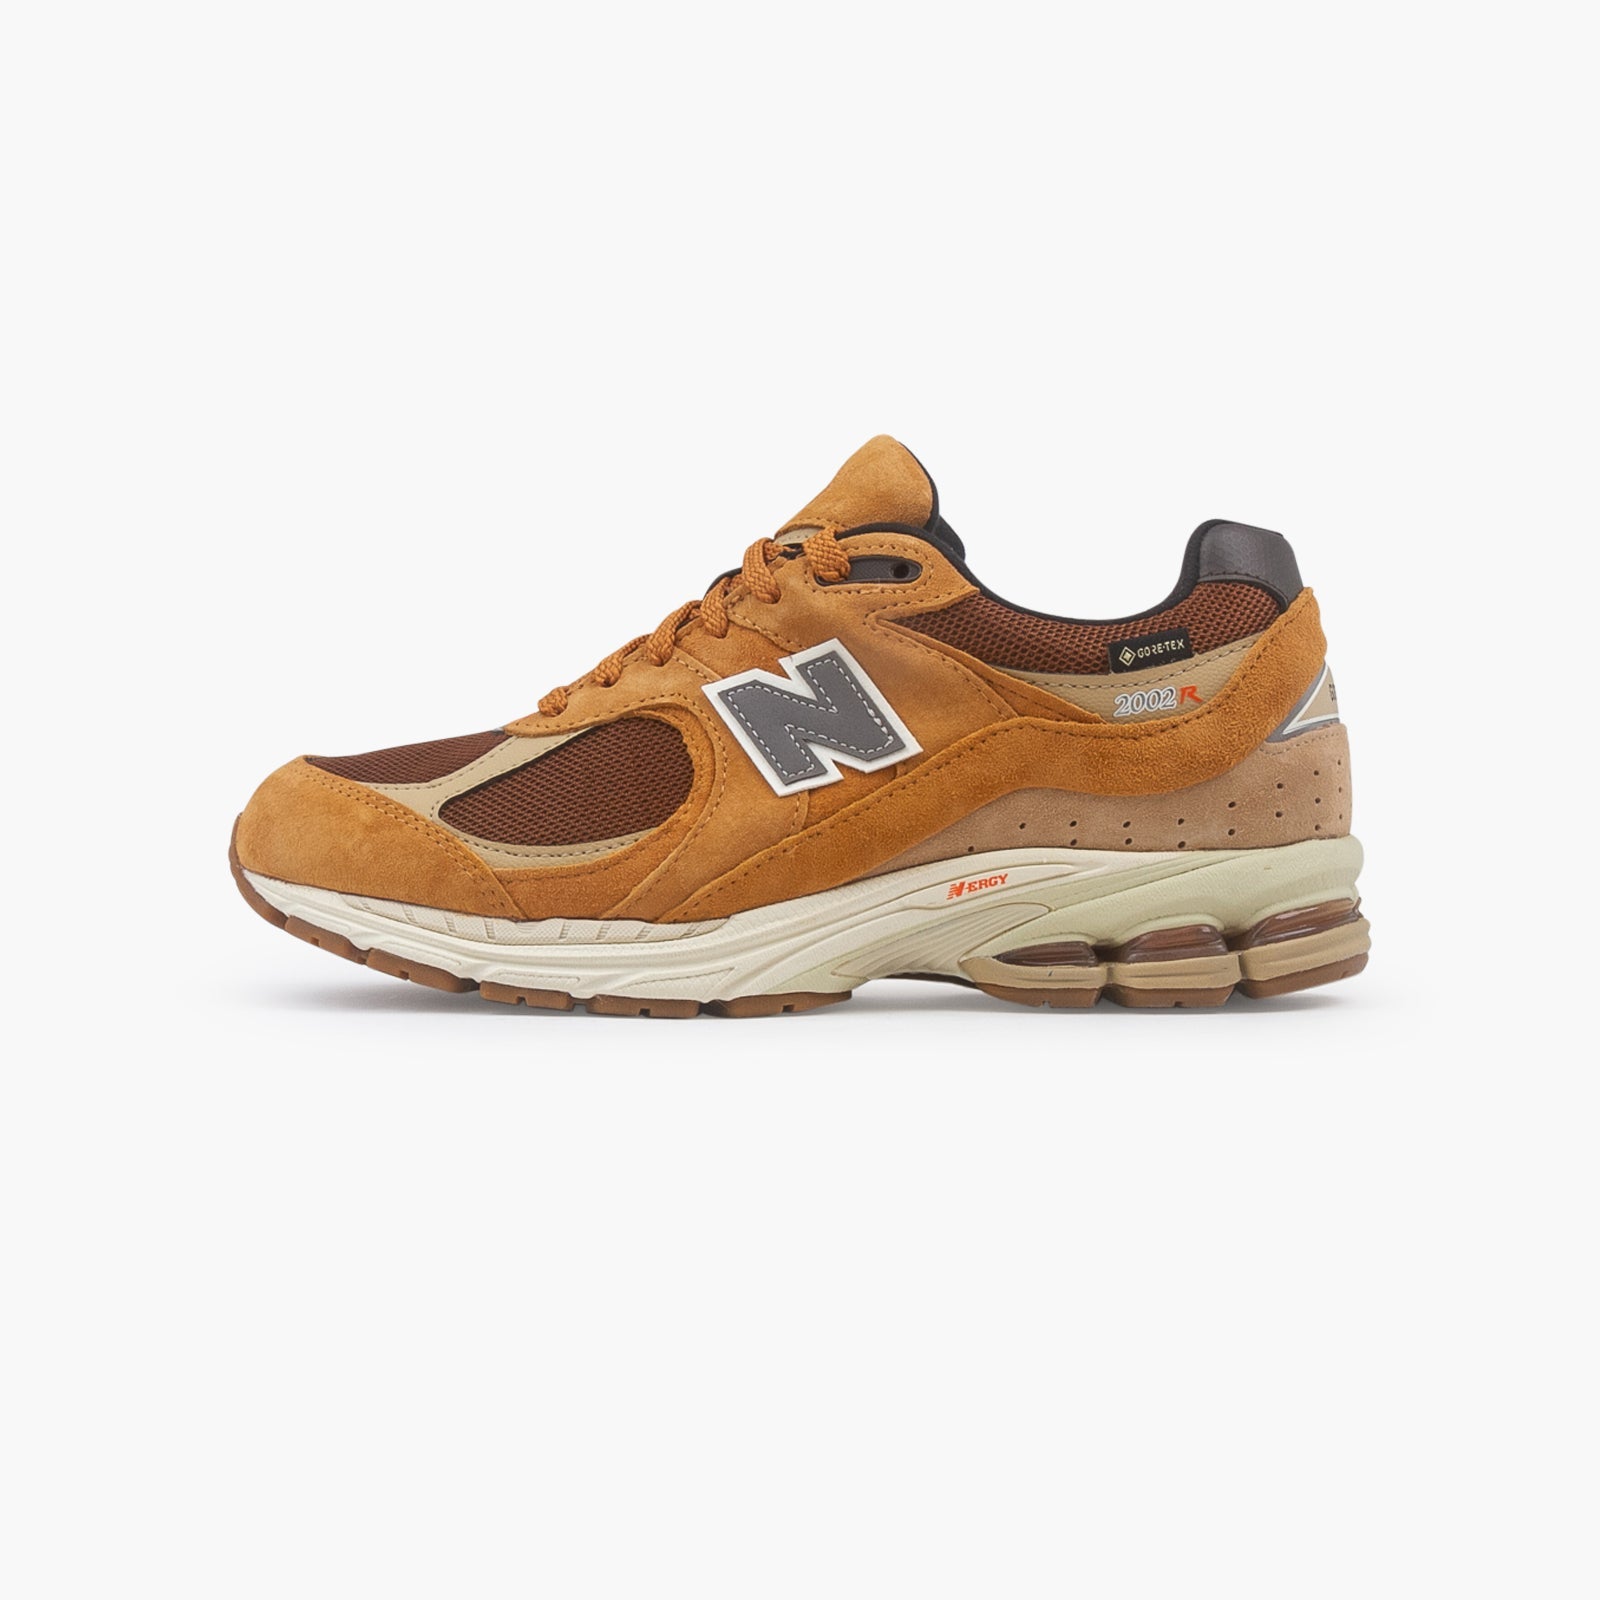 New Balance 2002R-SUEDE Store